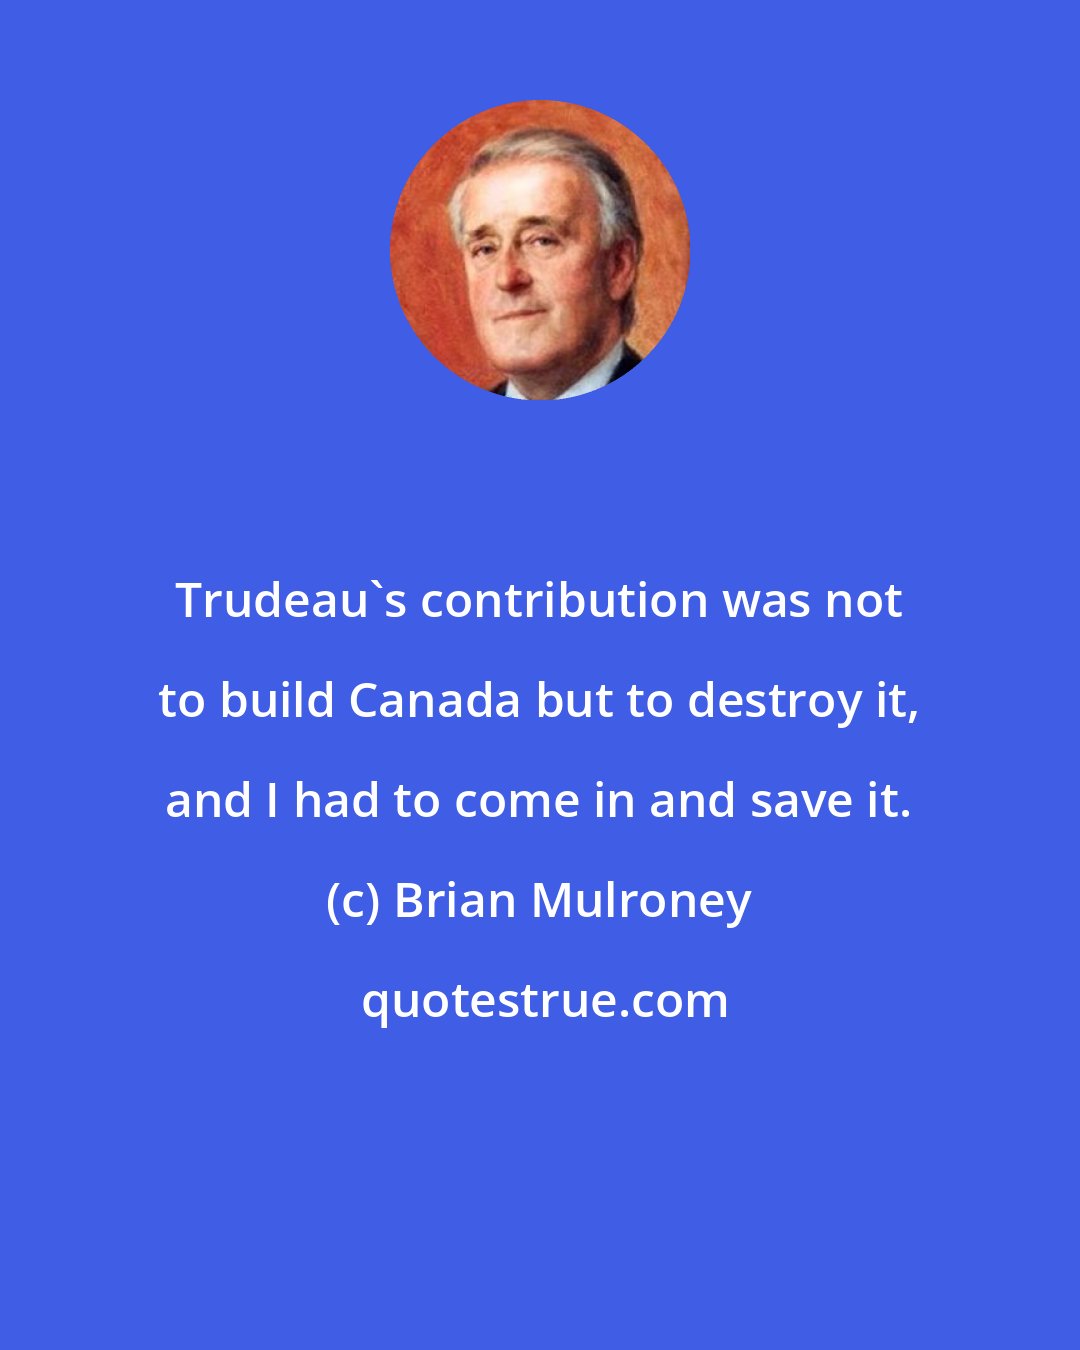 Brian Mulroney: Trudeau's contribution was not to build Canada but to destroy it, and I had to come in and save it.